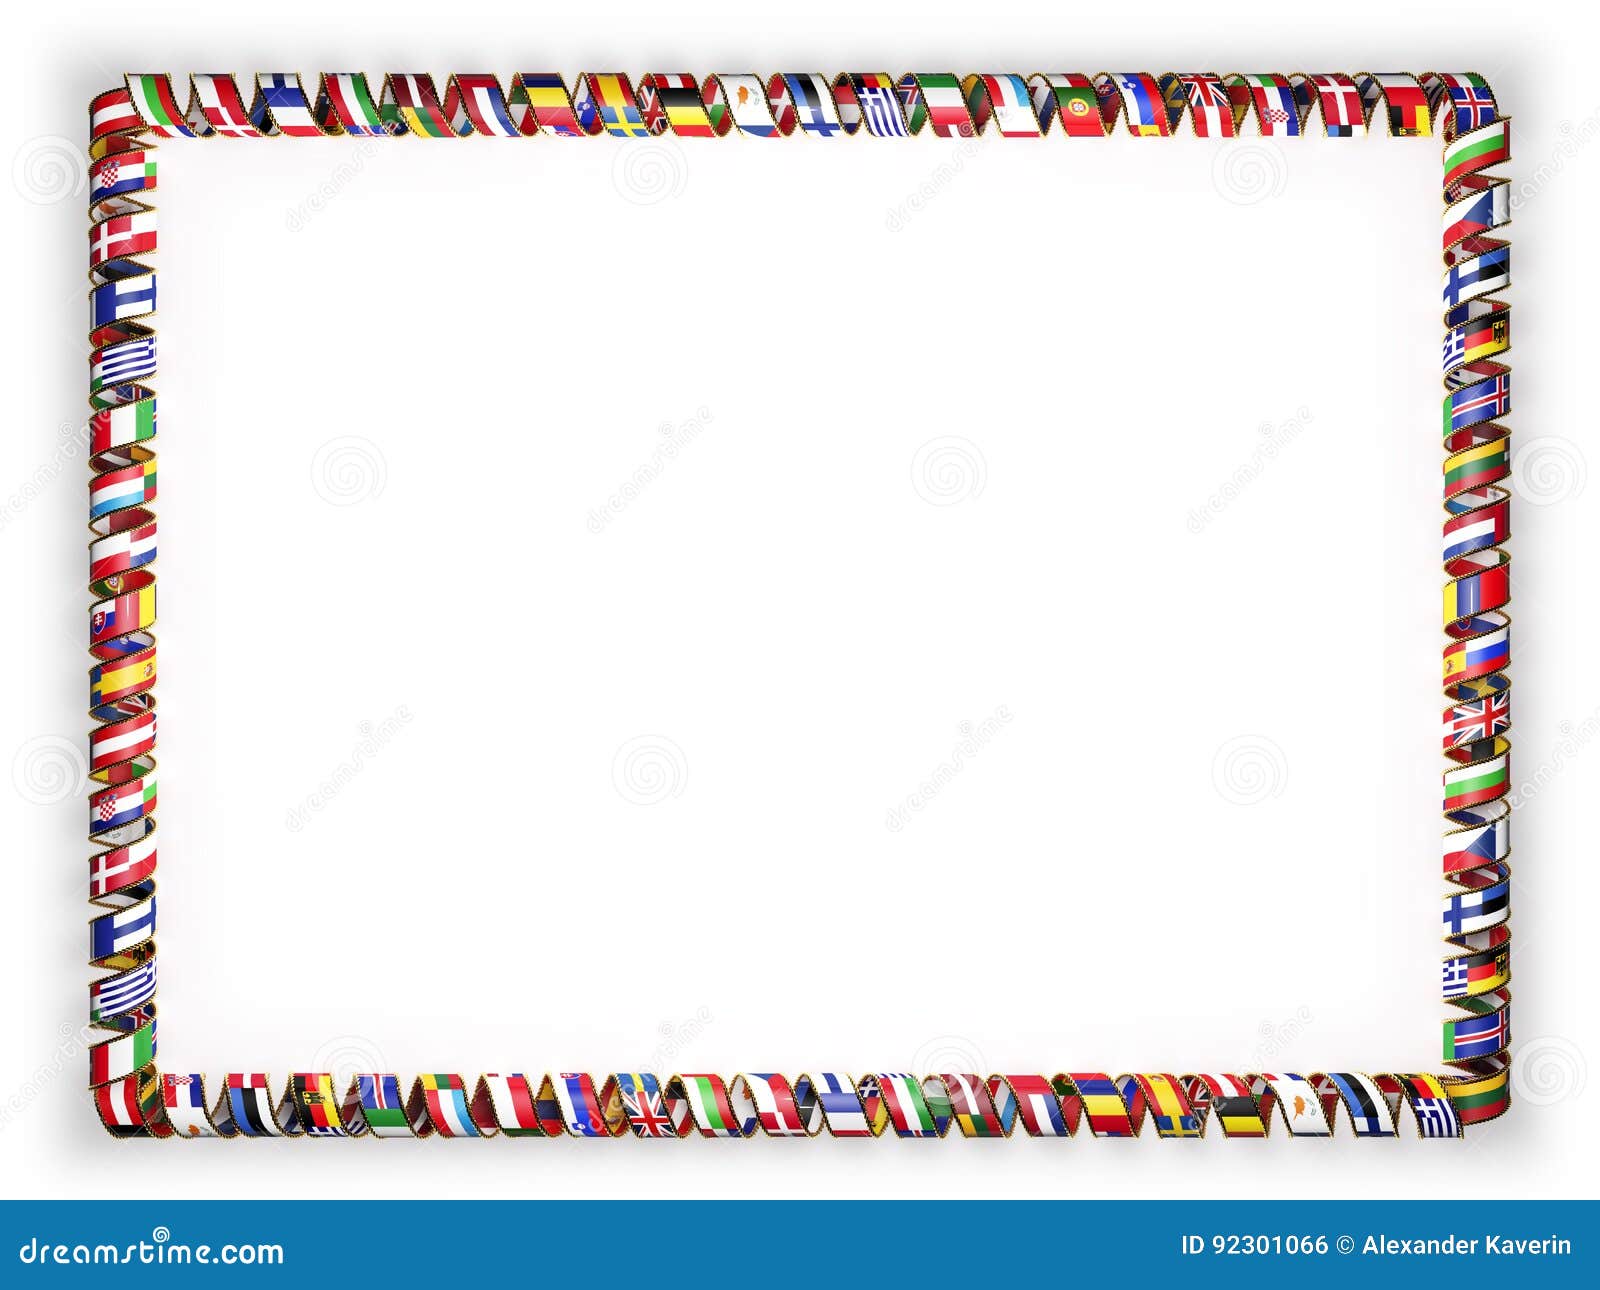 DIYthinker Philippines Country Flag Name Desktop Photo Frame Picture Display Decoration Art Painting